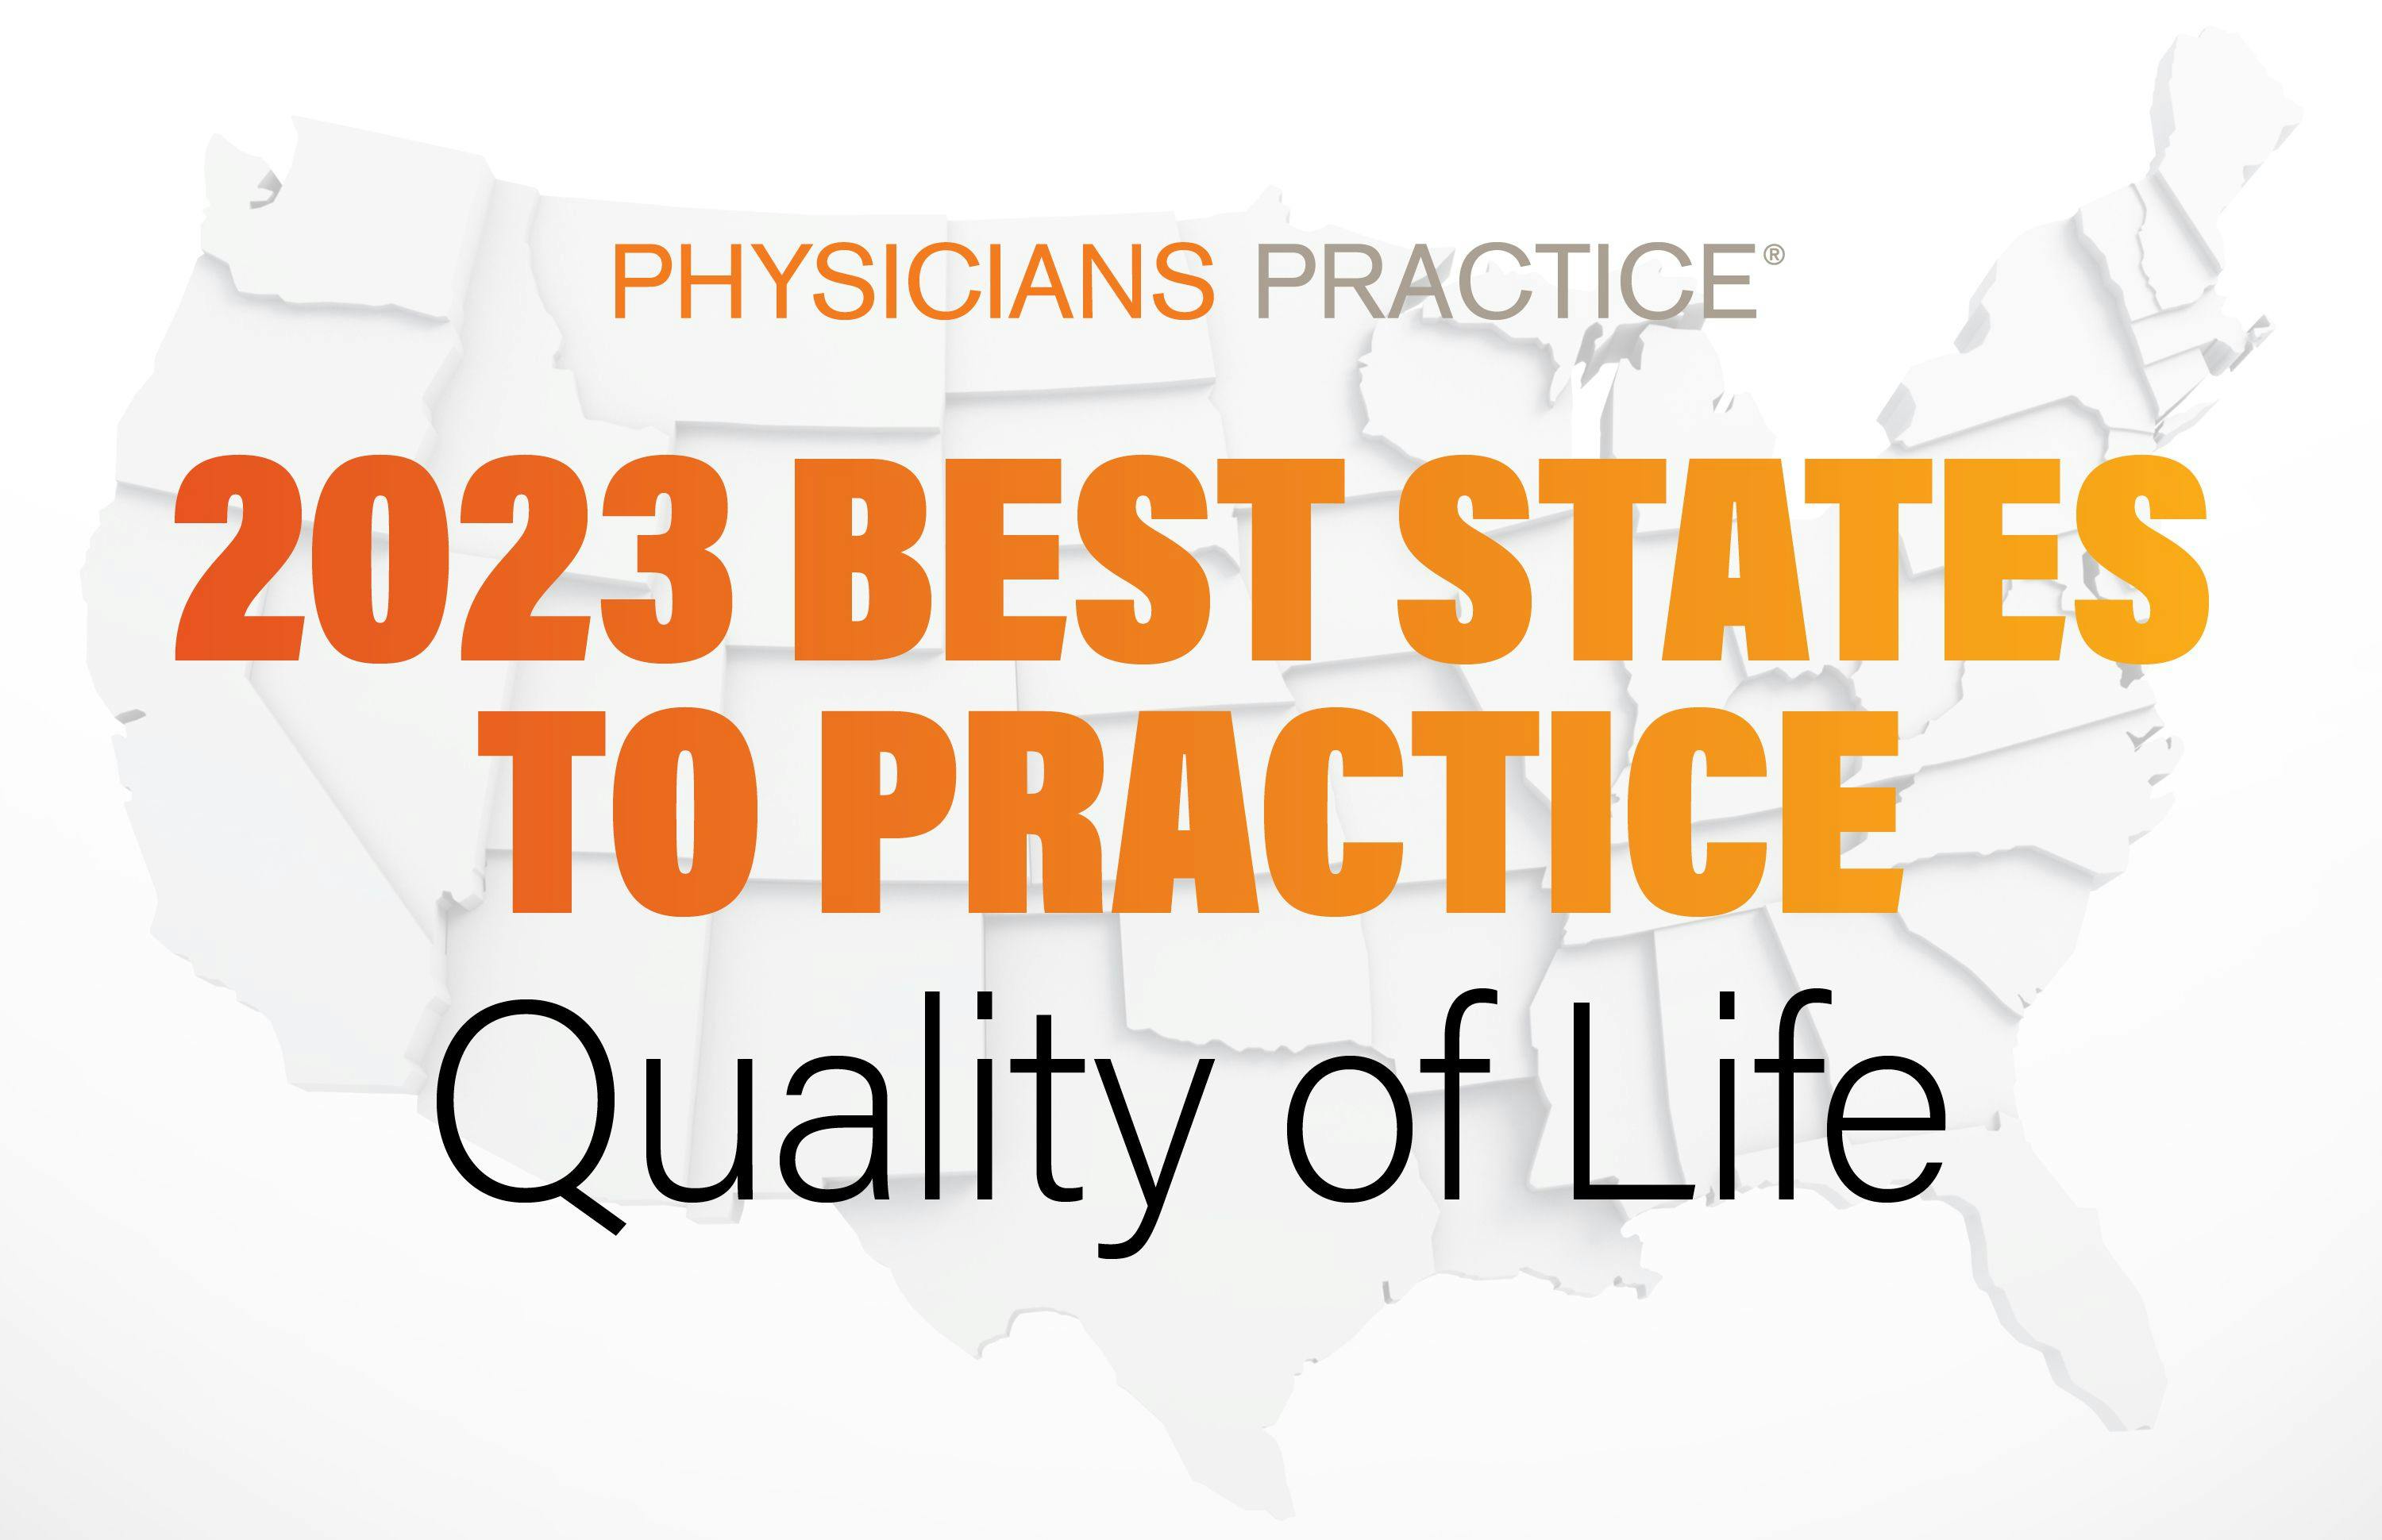 The 8 best states to practice for quality of life